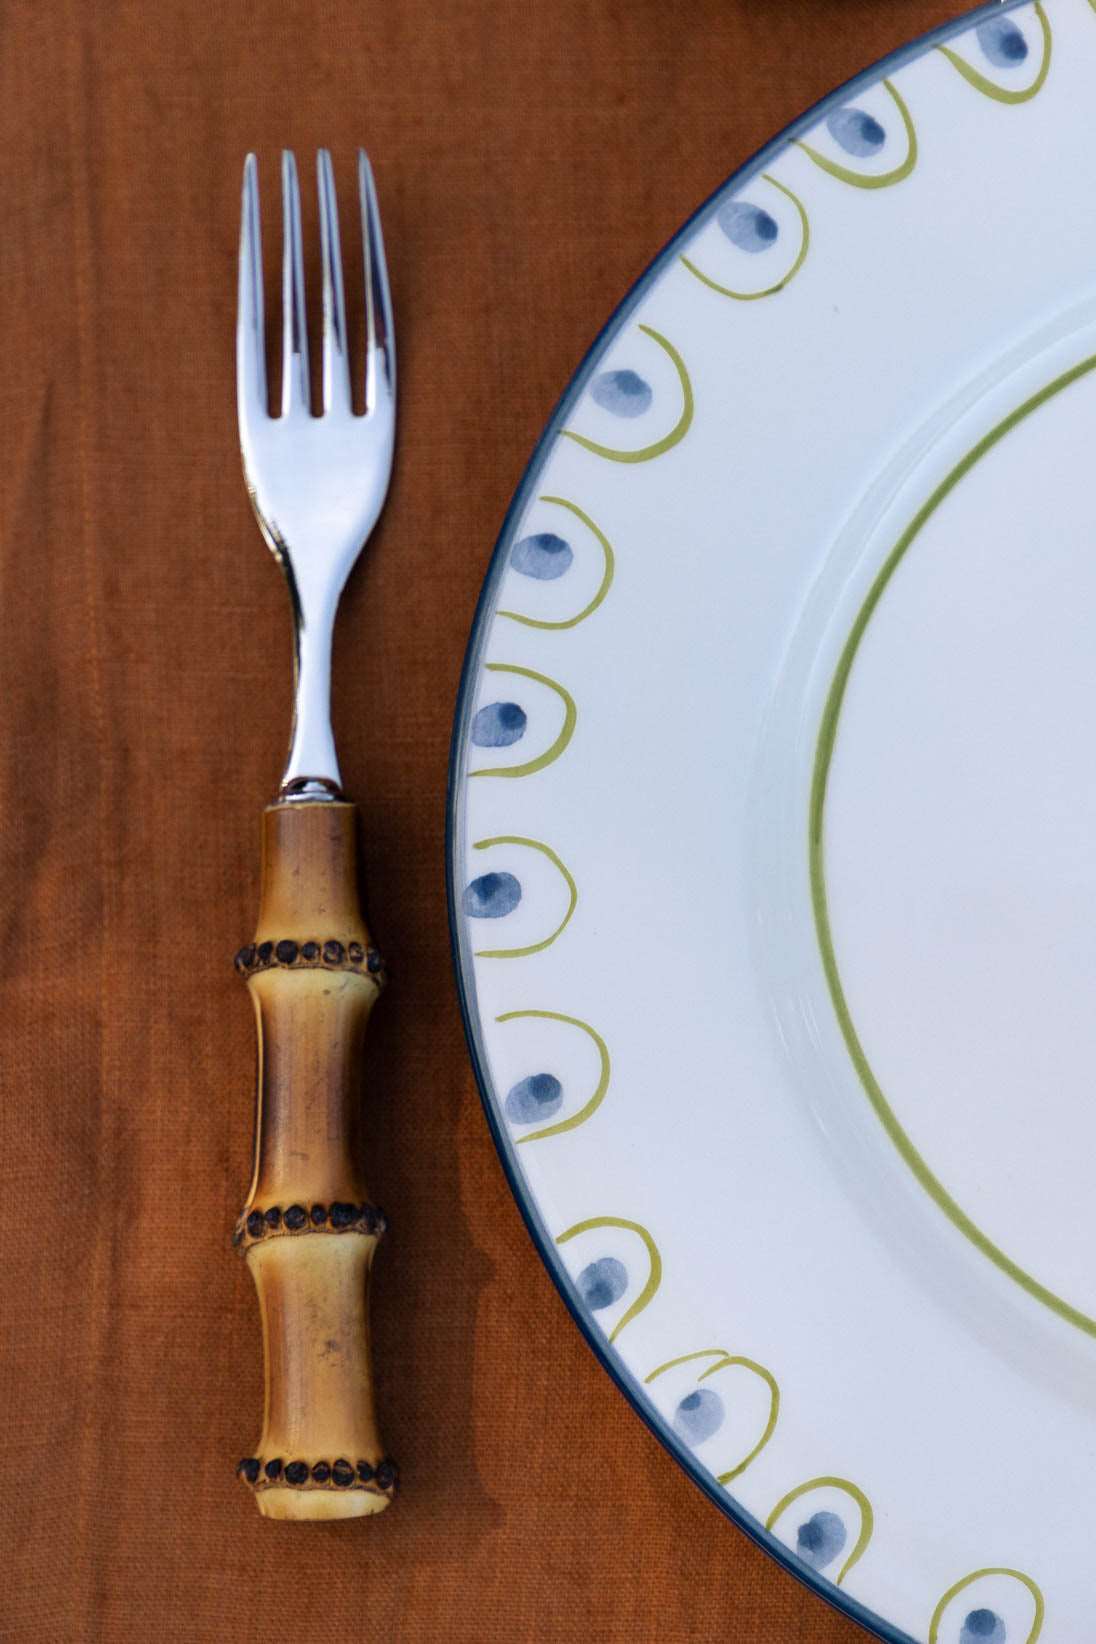 Dinner Bamboo Cutlery Set - 12 pieces